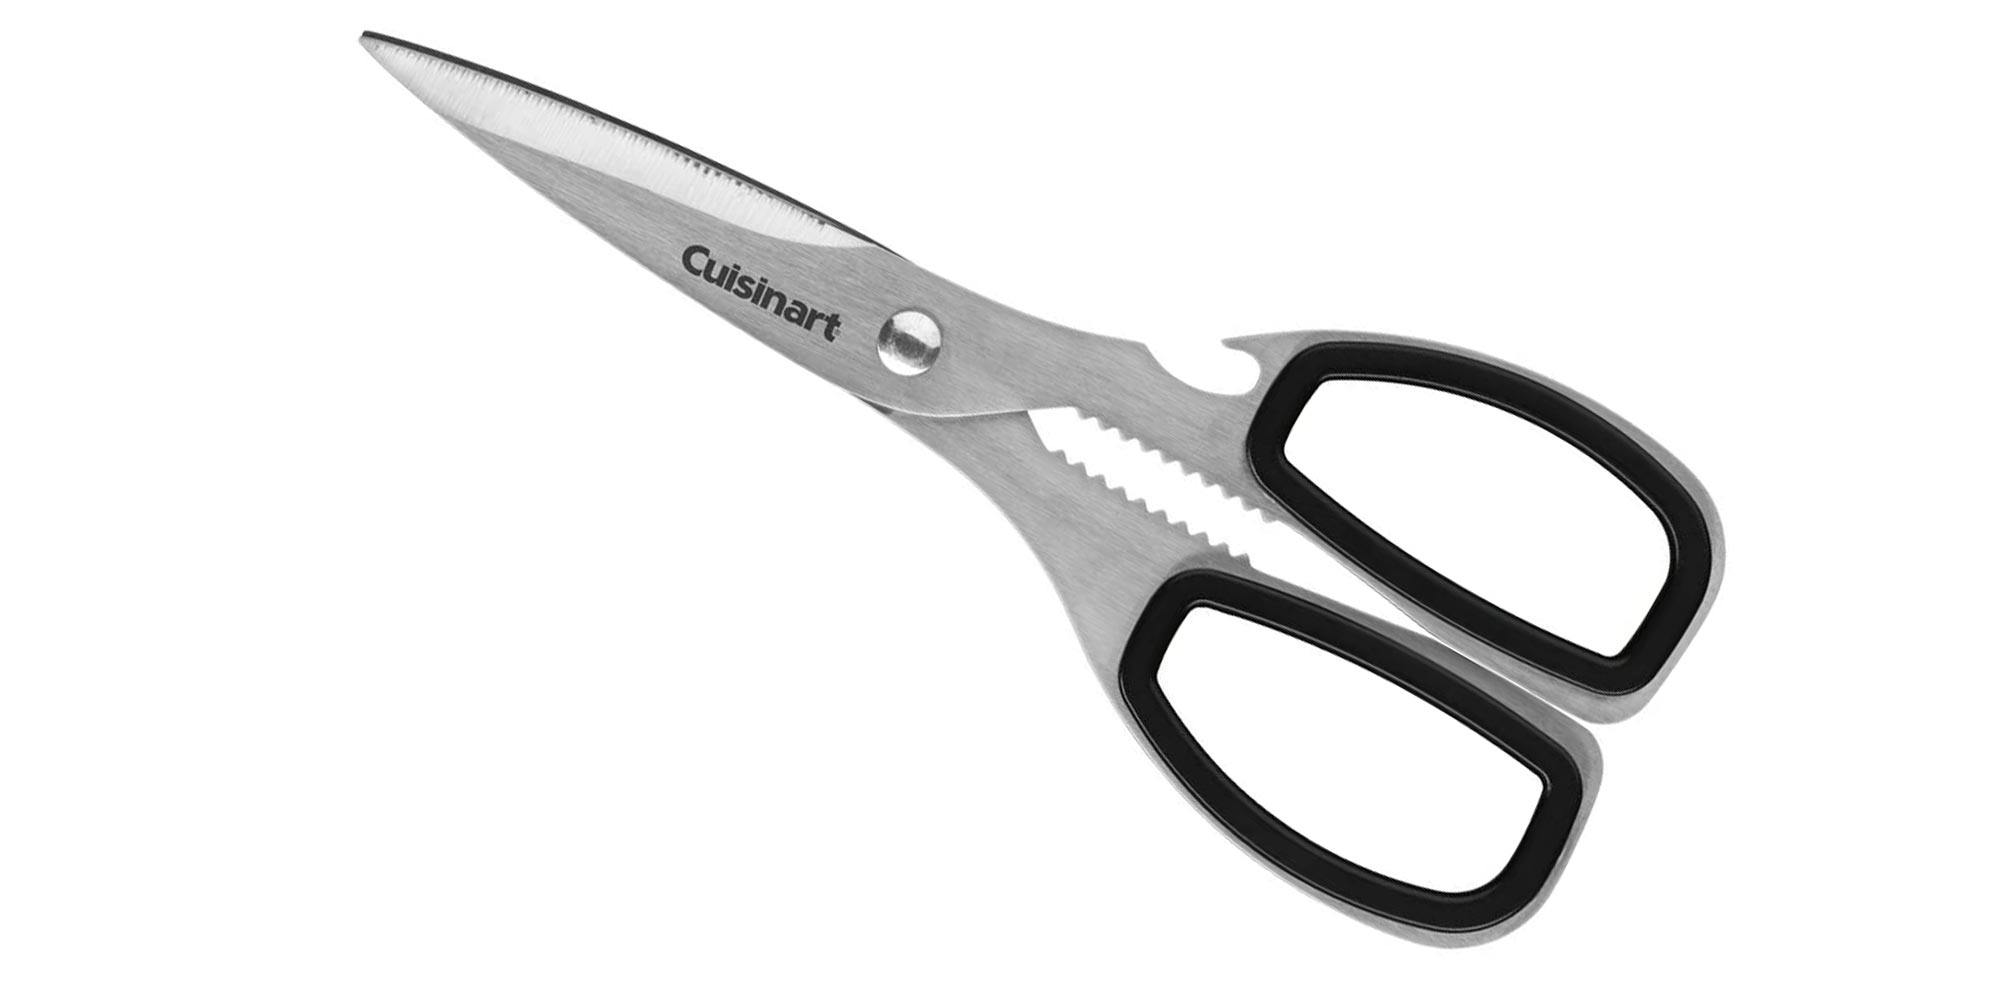 Cuisinart's classic shears come with a lifetime warranty at